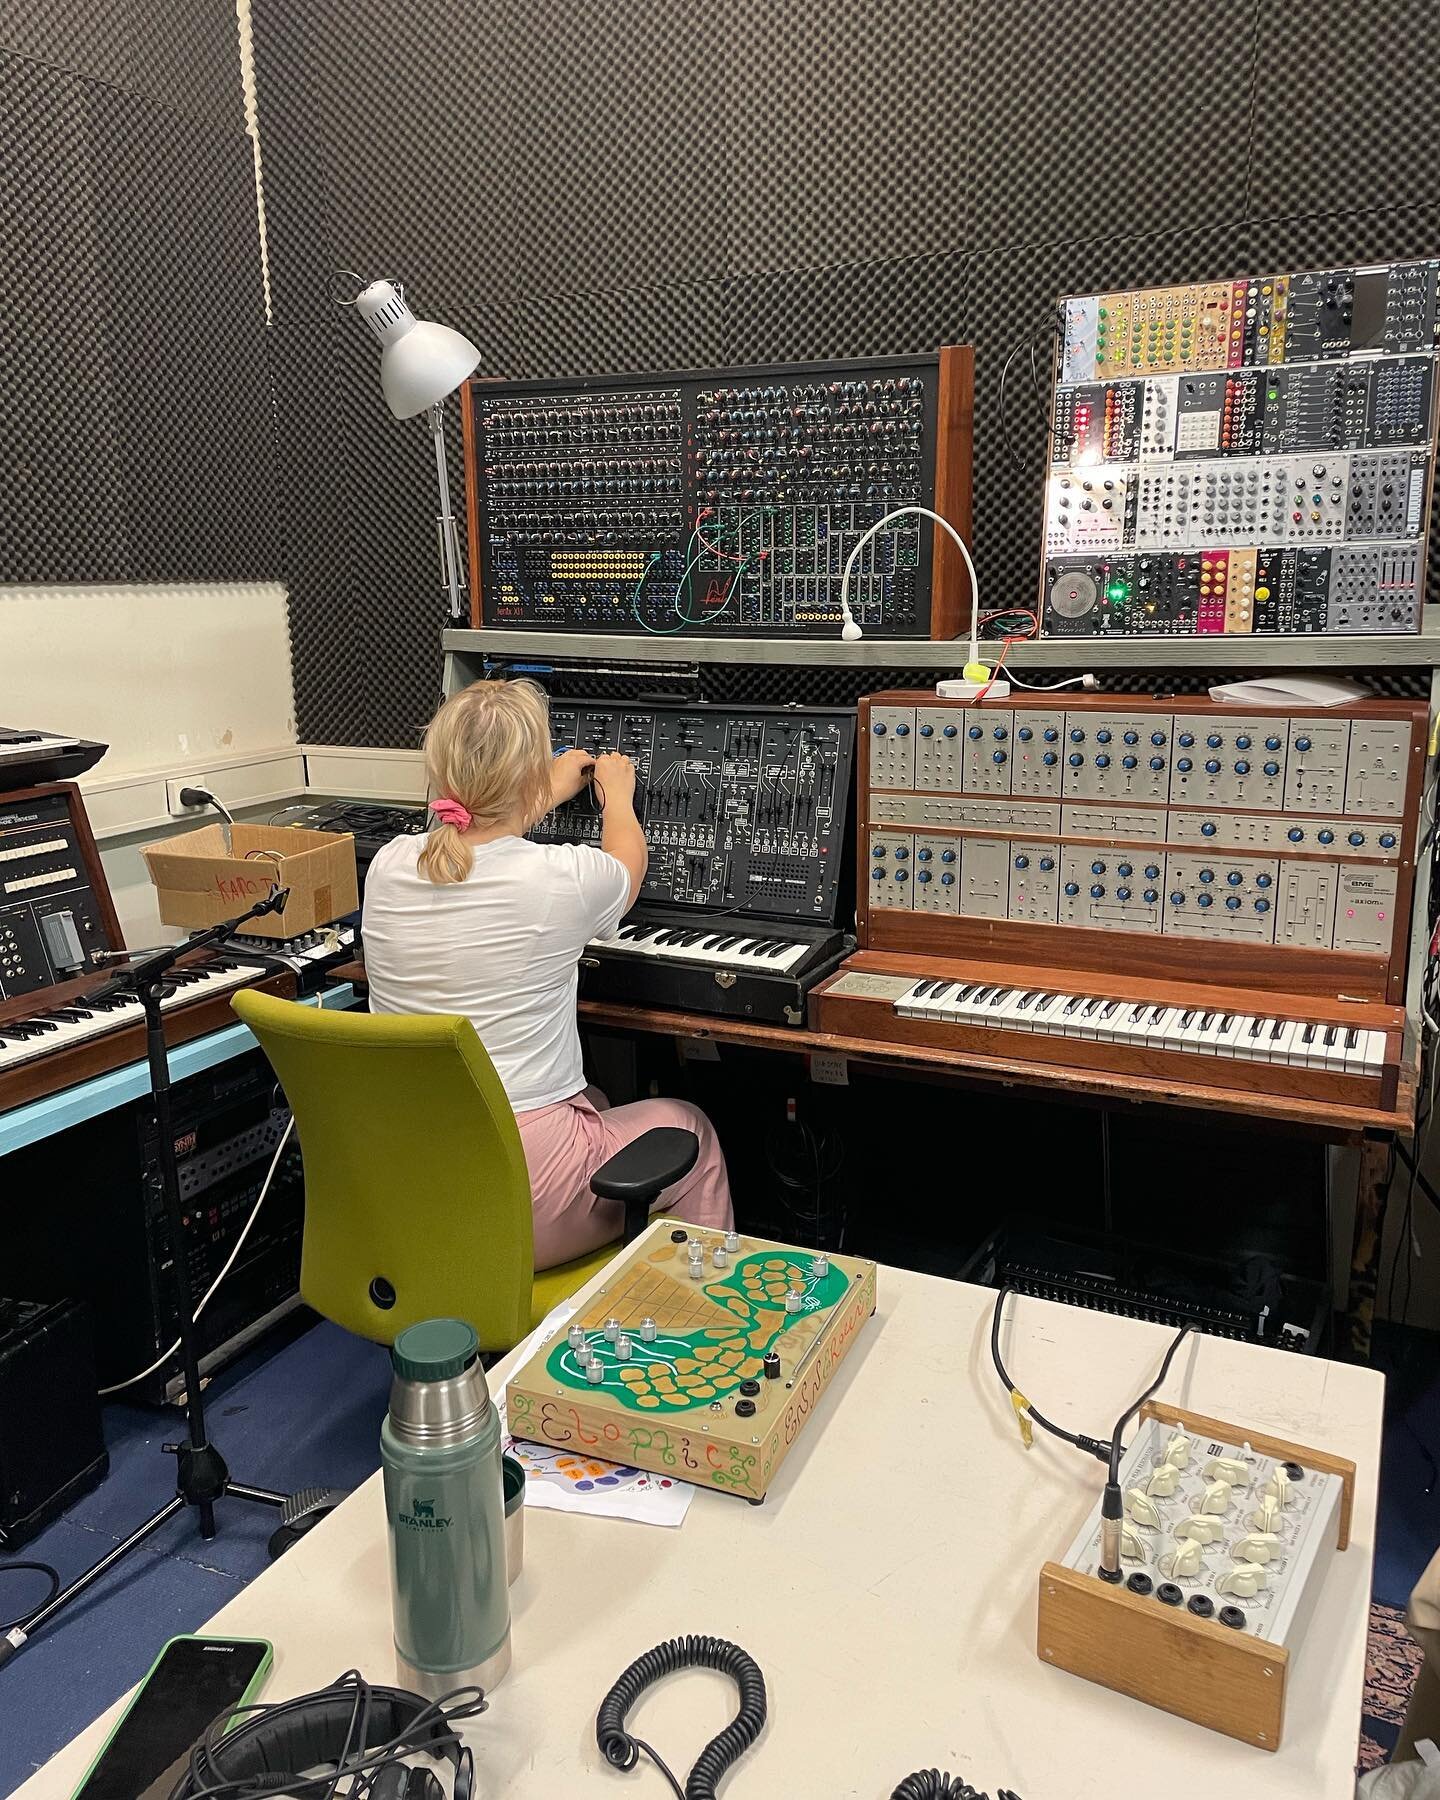 In search of creatures, landscapes and universes in these legendary super machines 💓 
Thanks Arp 2600, Blippoo Box, Syrinx and all the others 

We were able to meet them during a residency at @worm_rotterdam the past week. It was great! Thanks!